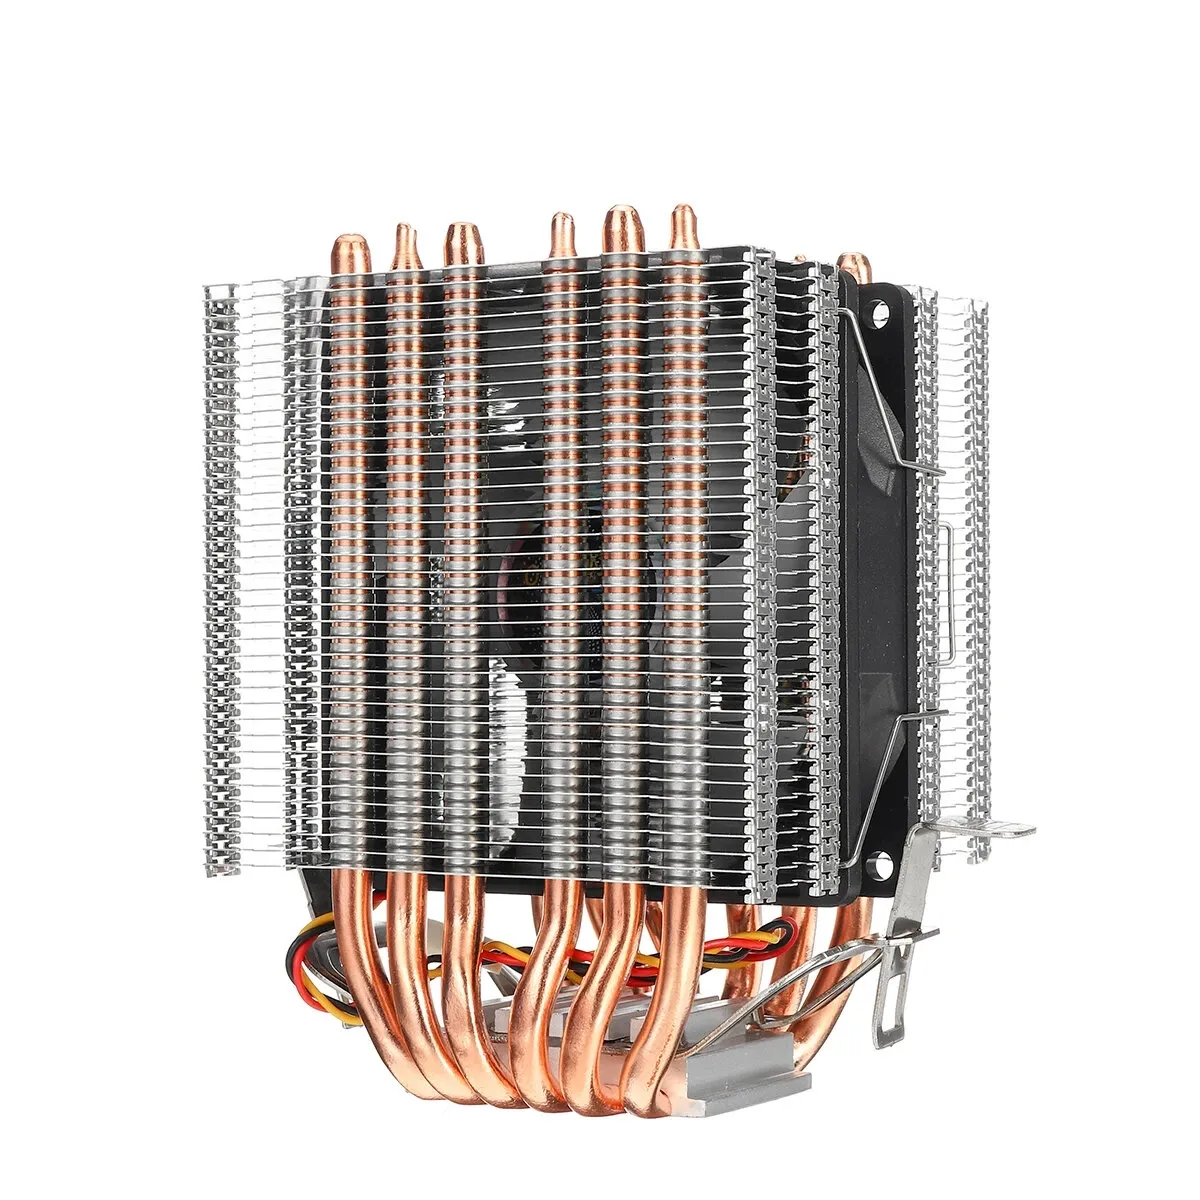 3 Pin CPU Cooler Fan Heatsink 6 Copper Heatpipe Cooling for Intel 775/1150/1151/1155/1156/1366 and AMD All Platforms - White